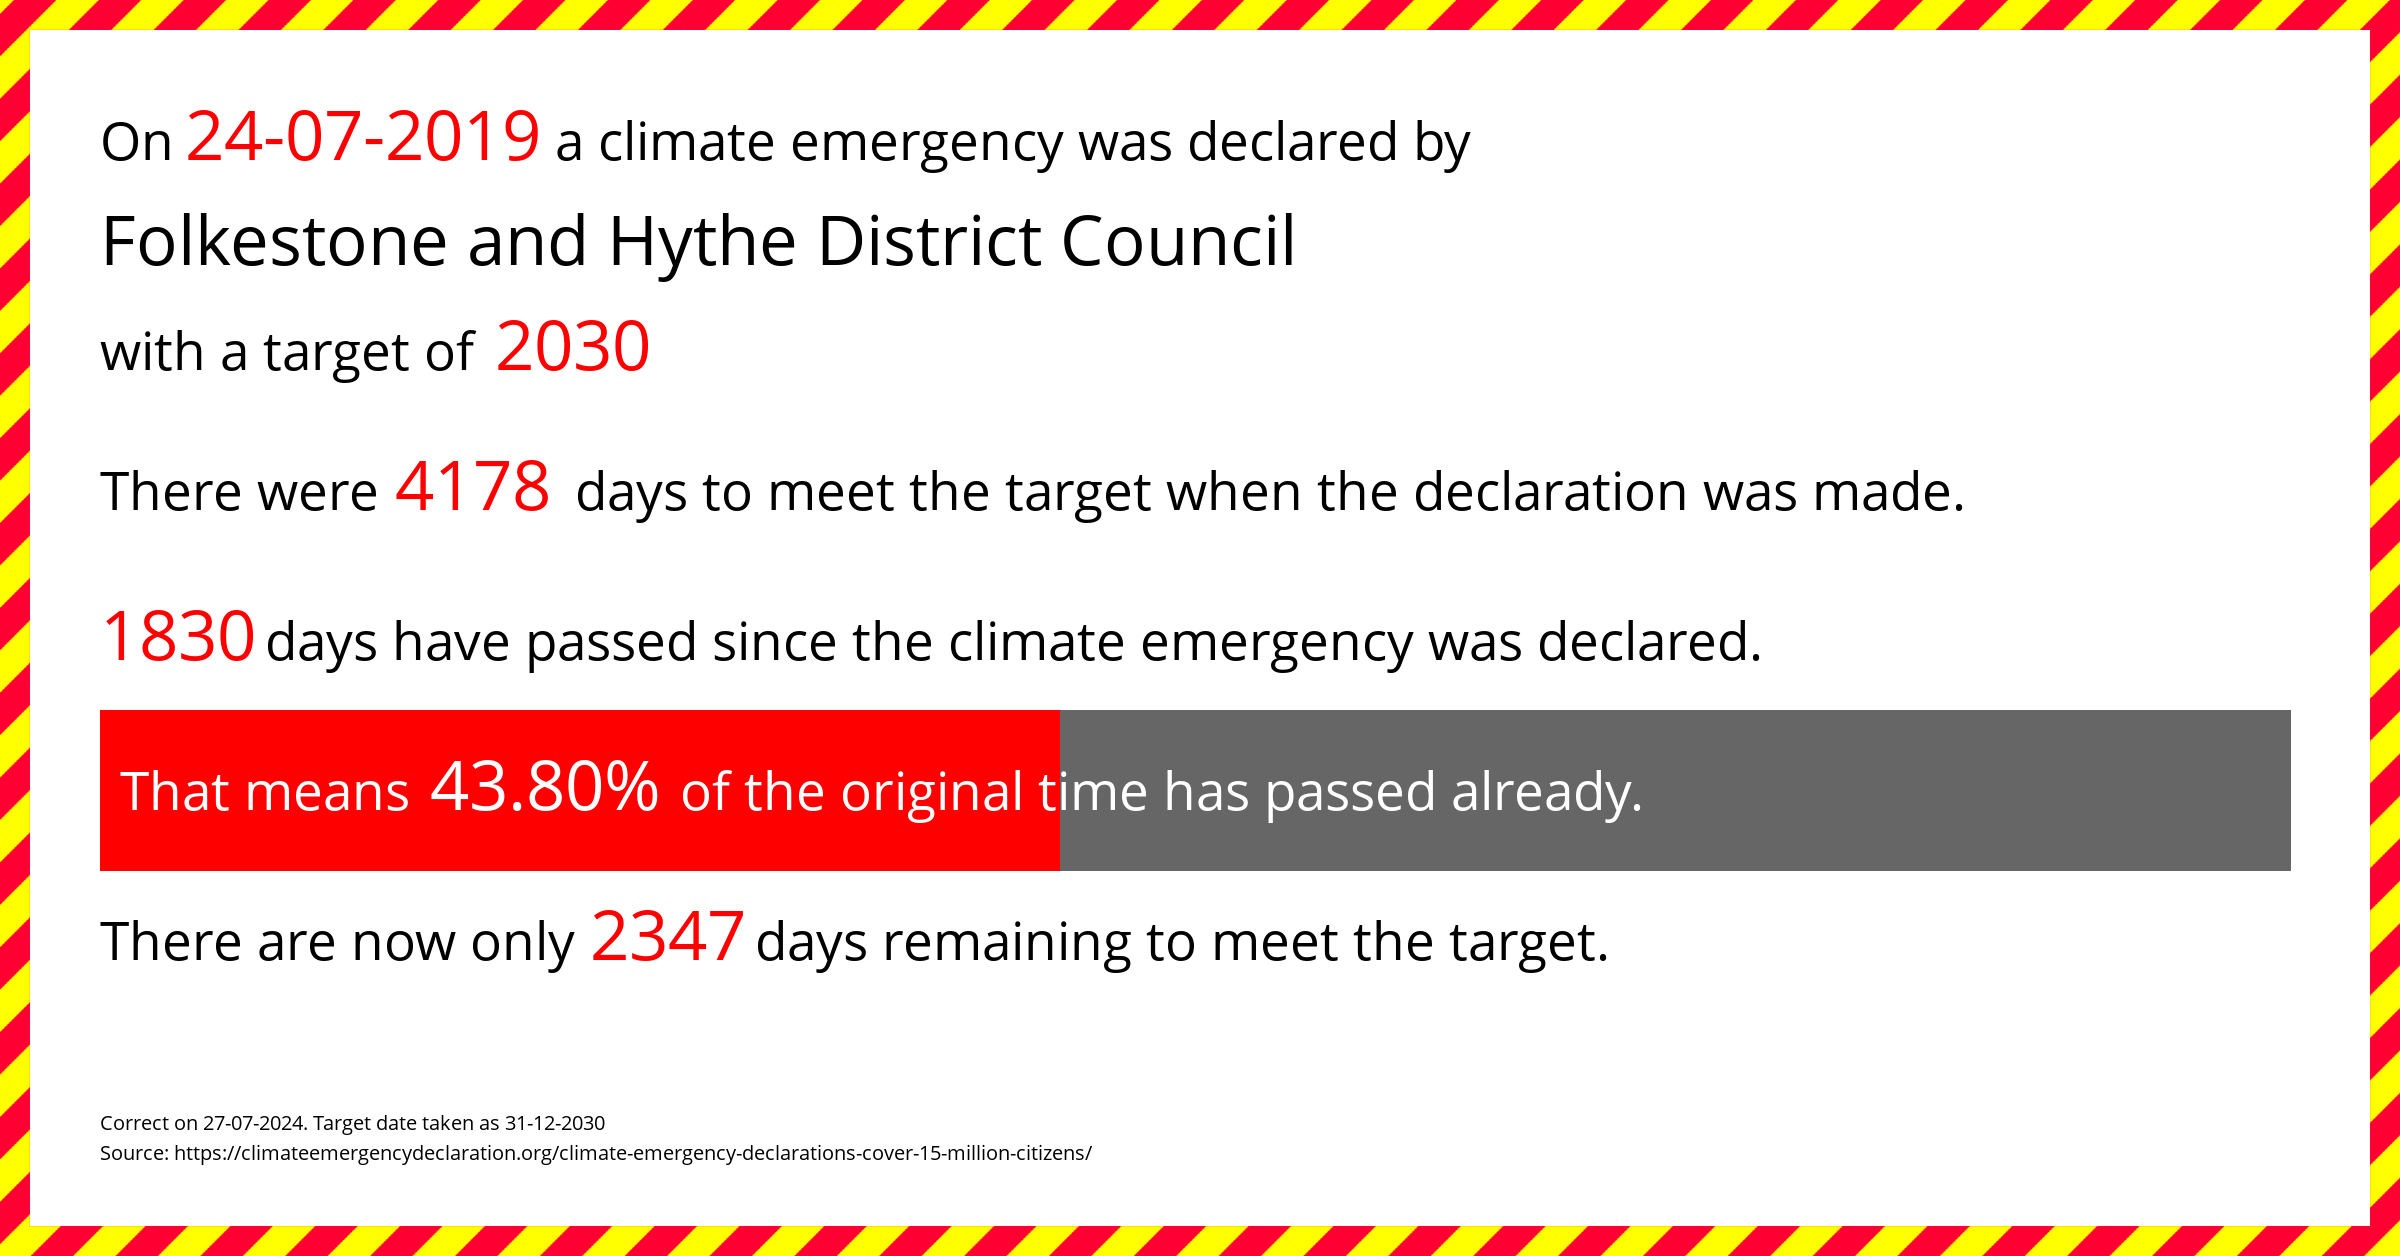 Folkestone and Hythe District Council declared a Climate emergency on Wednesday 24th July 2019, with a target of 2030.